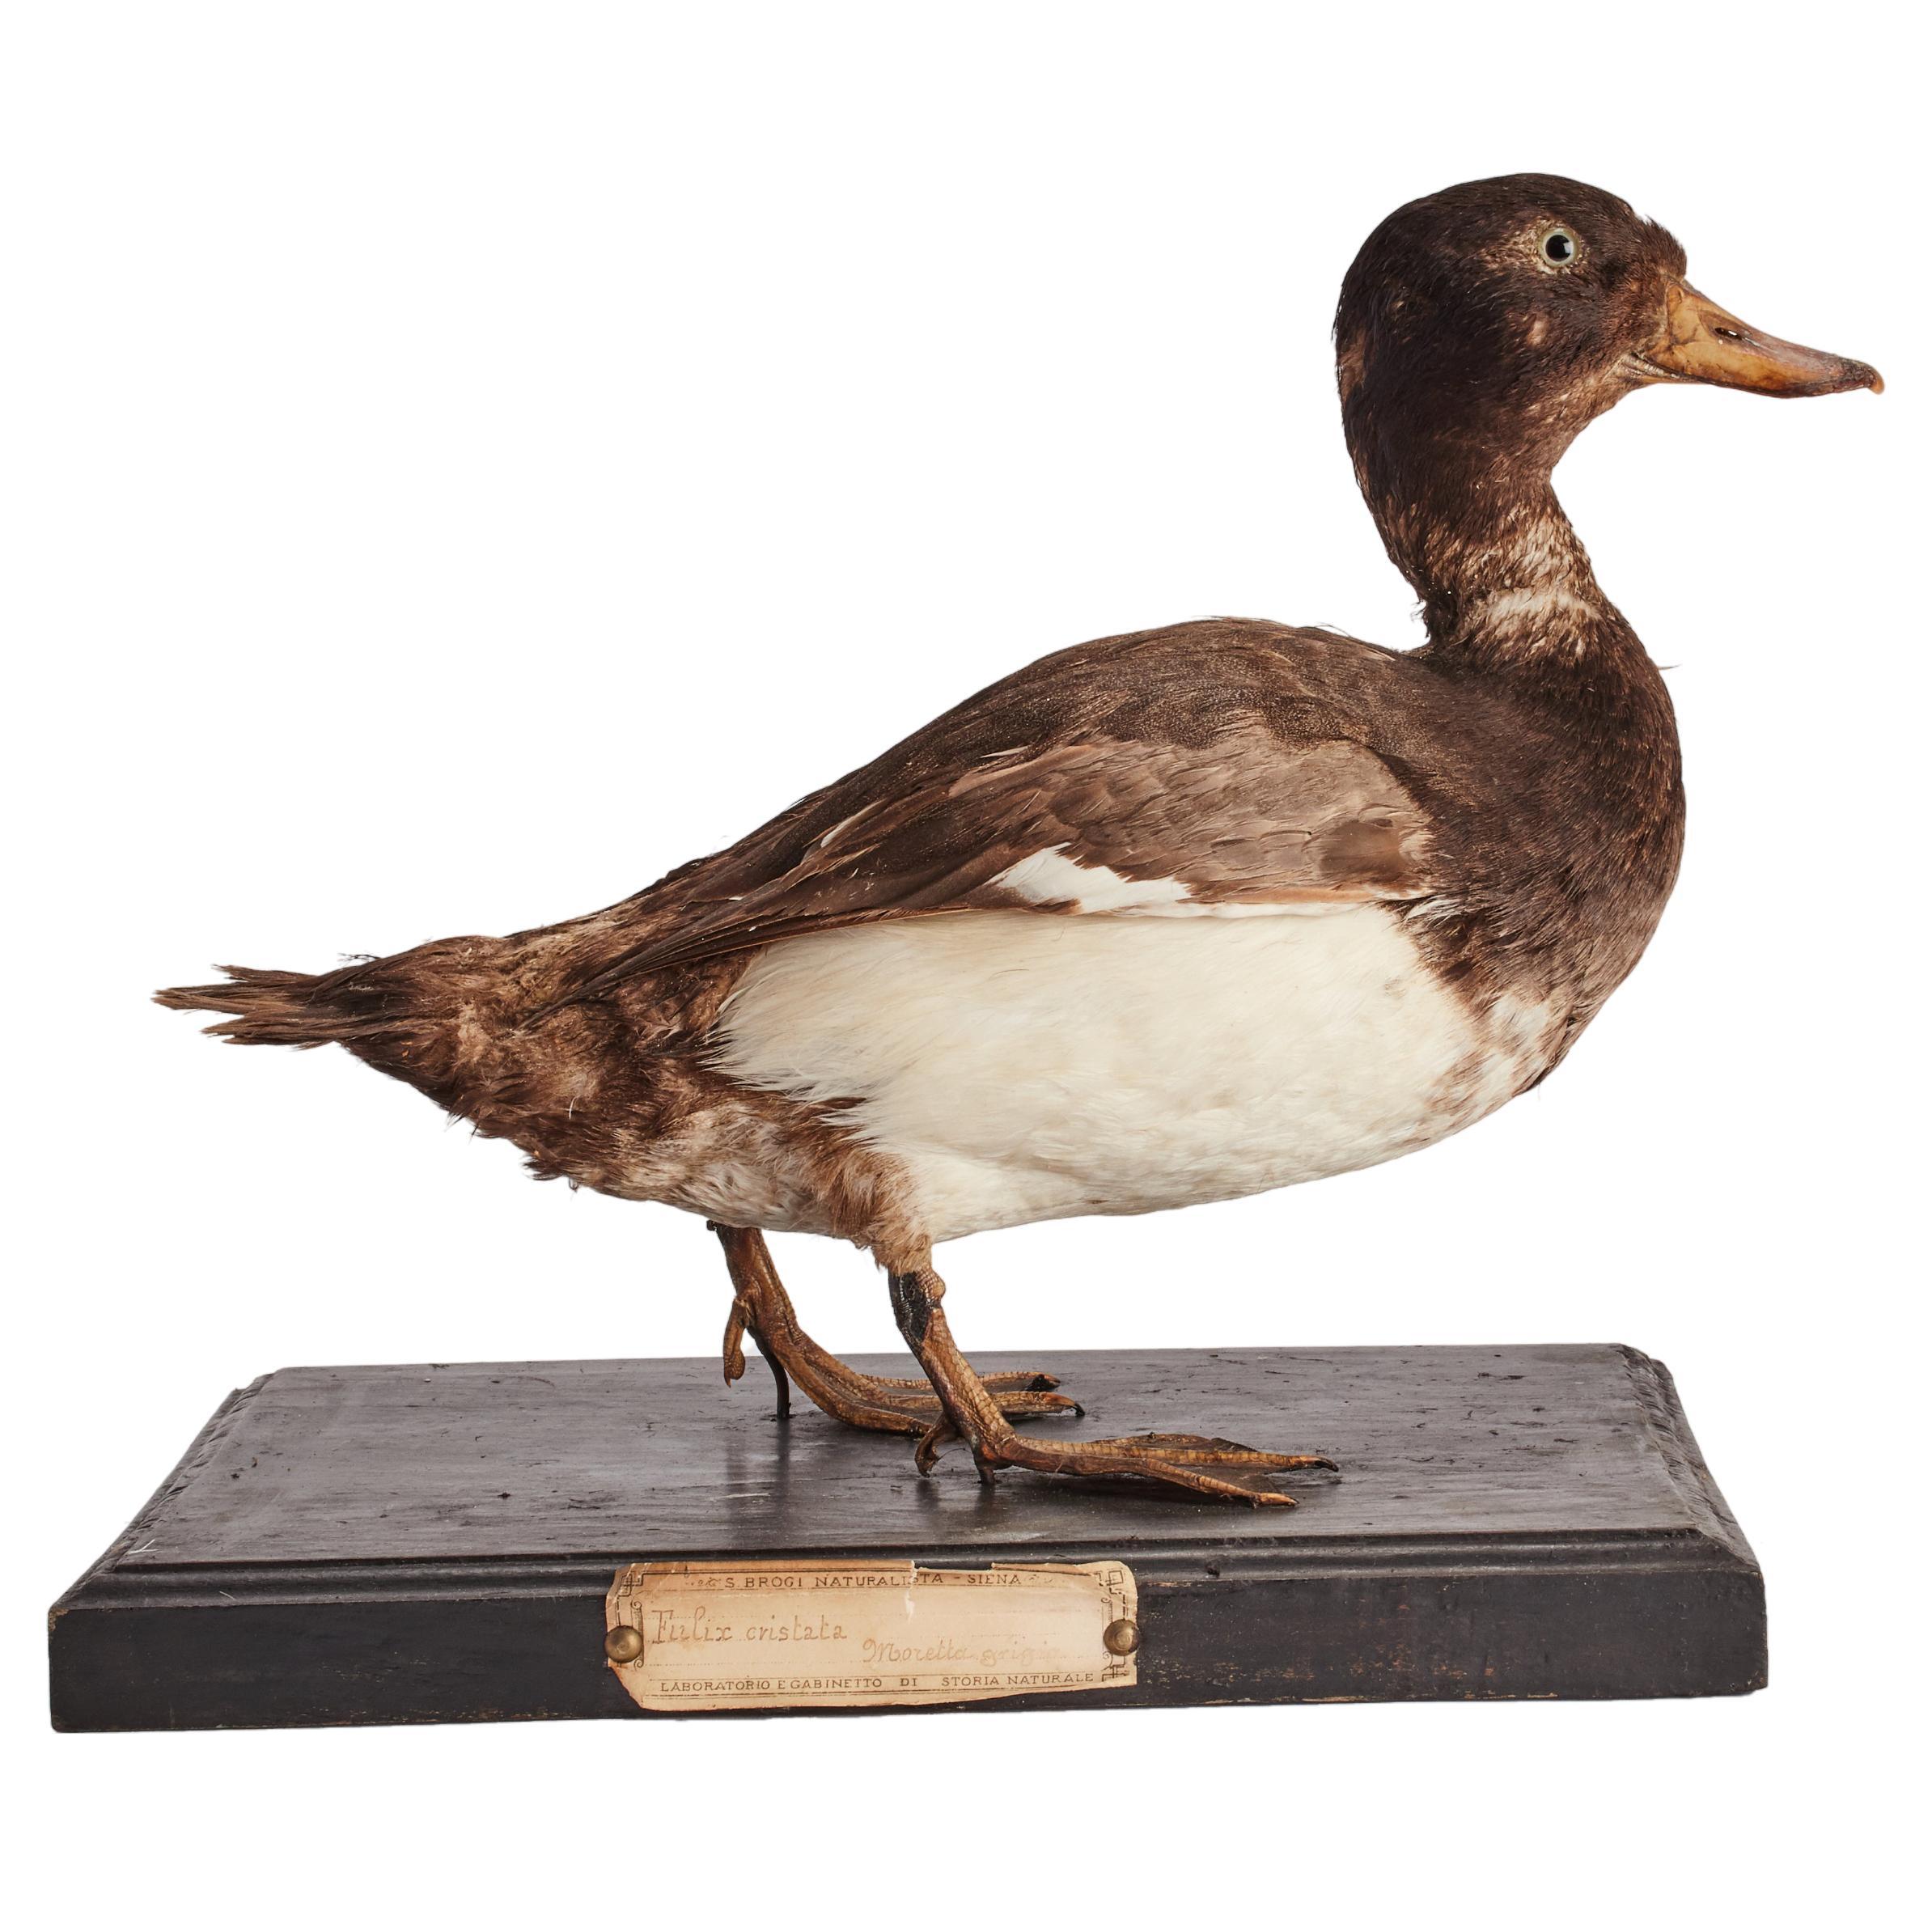 What birds are illegal to taxidermy?